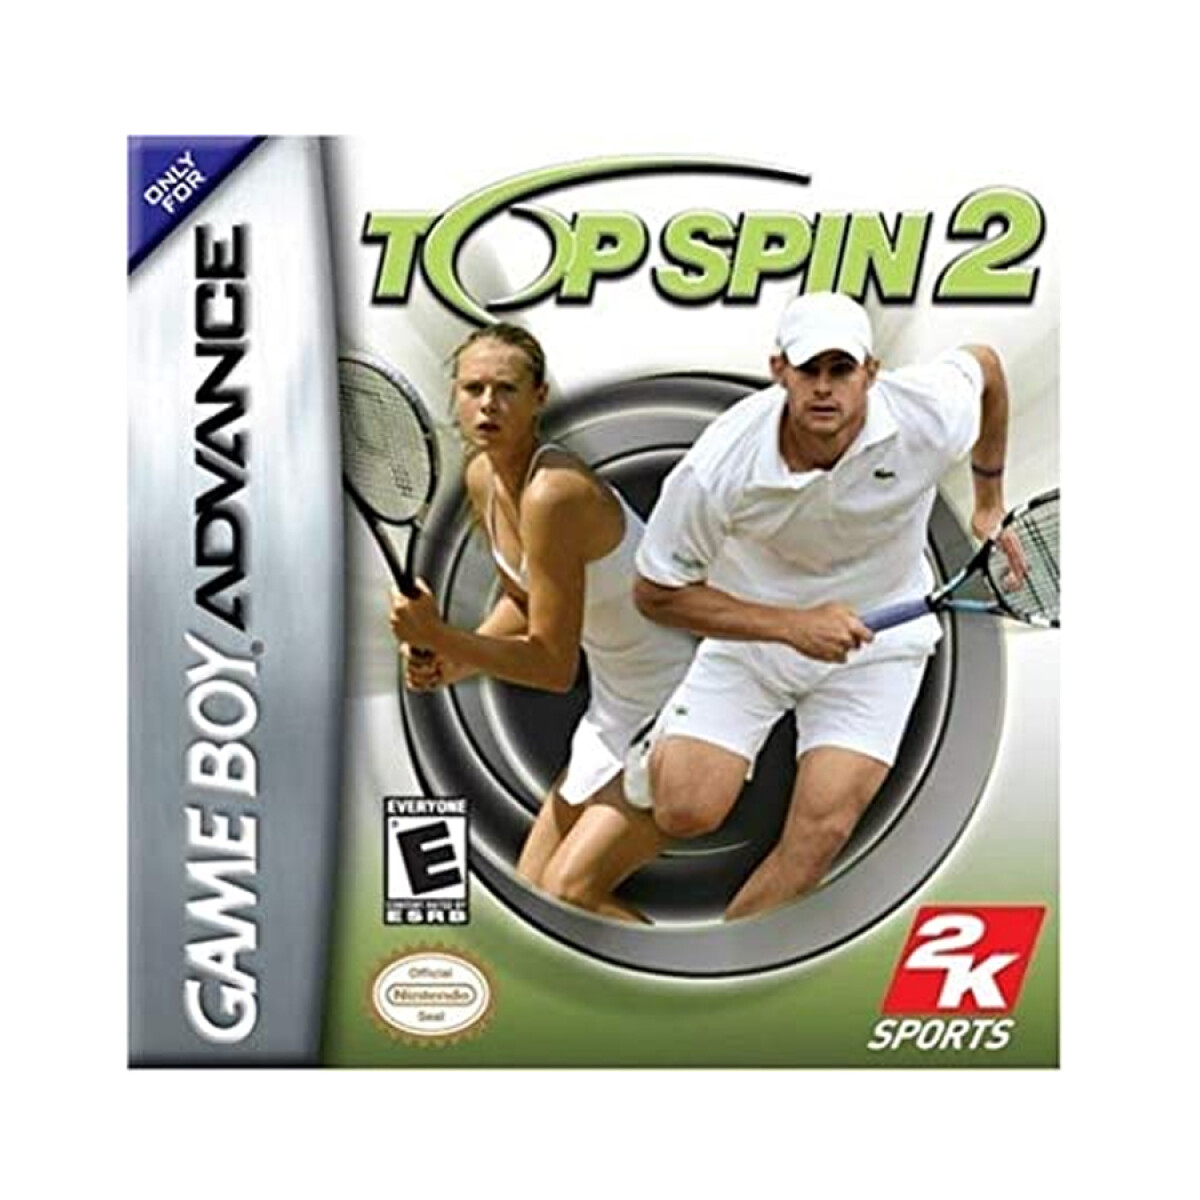 Top Spin 2 - Gameboy Advanced 